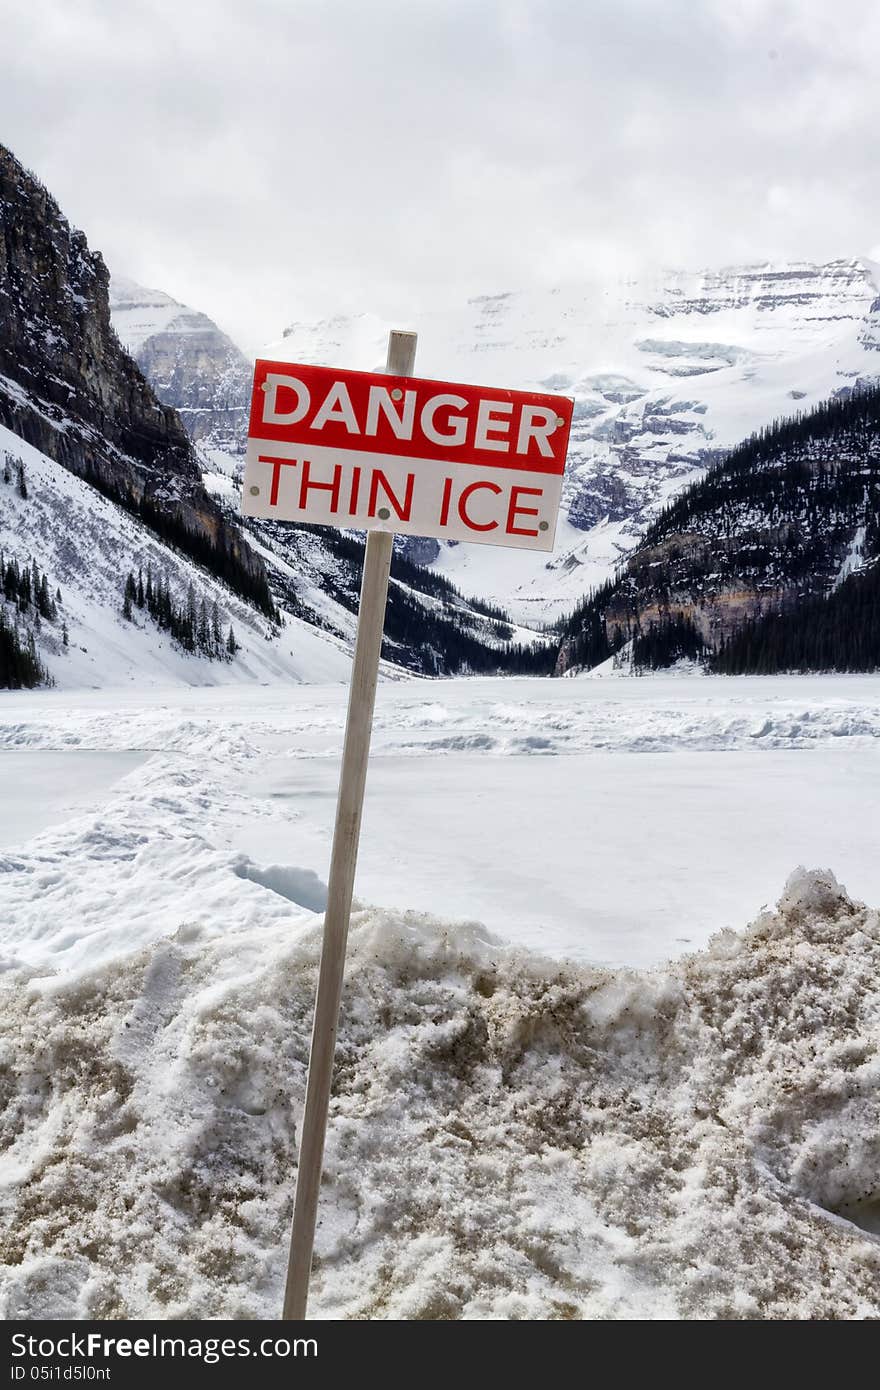 Danger thin ice sign with Canadian rockies and the frozen Lake Louise in the background